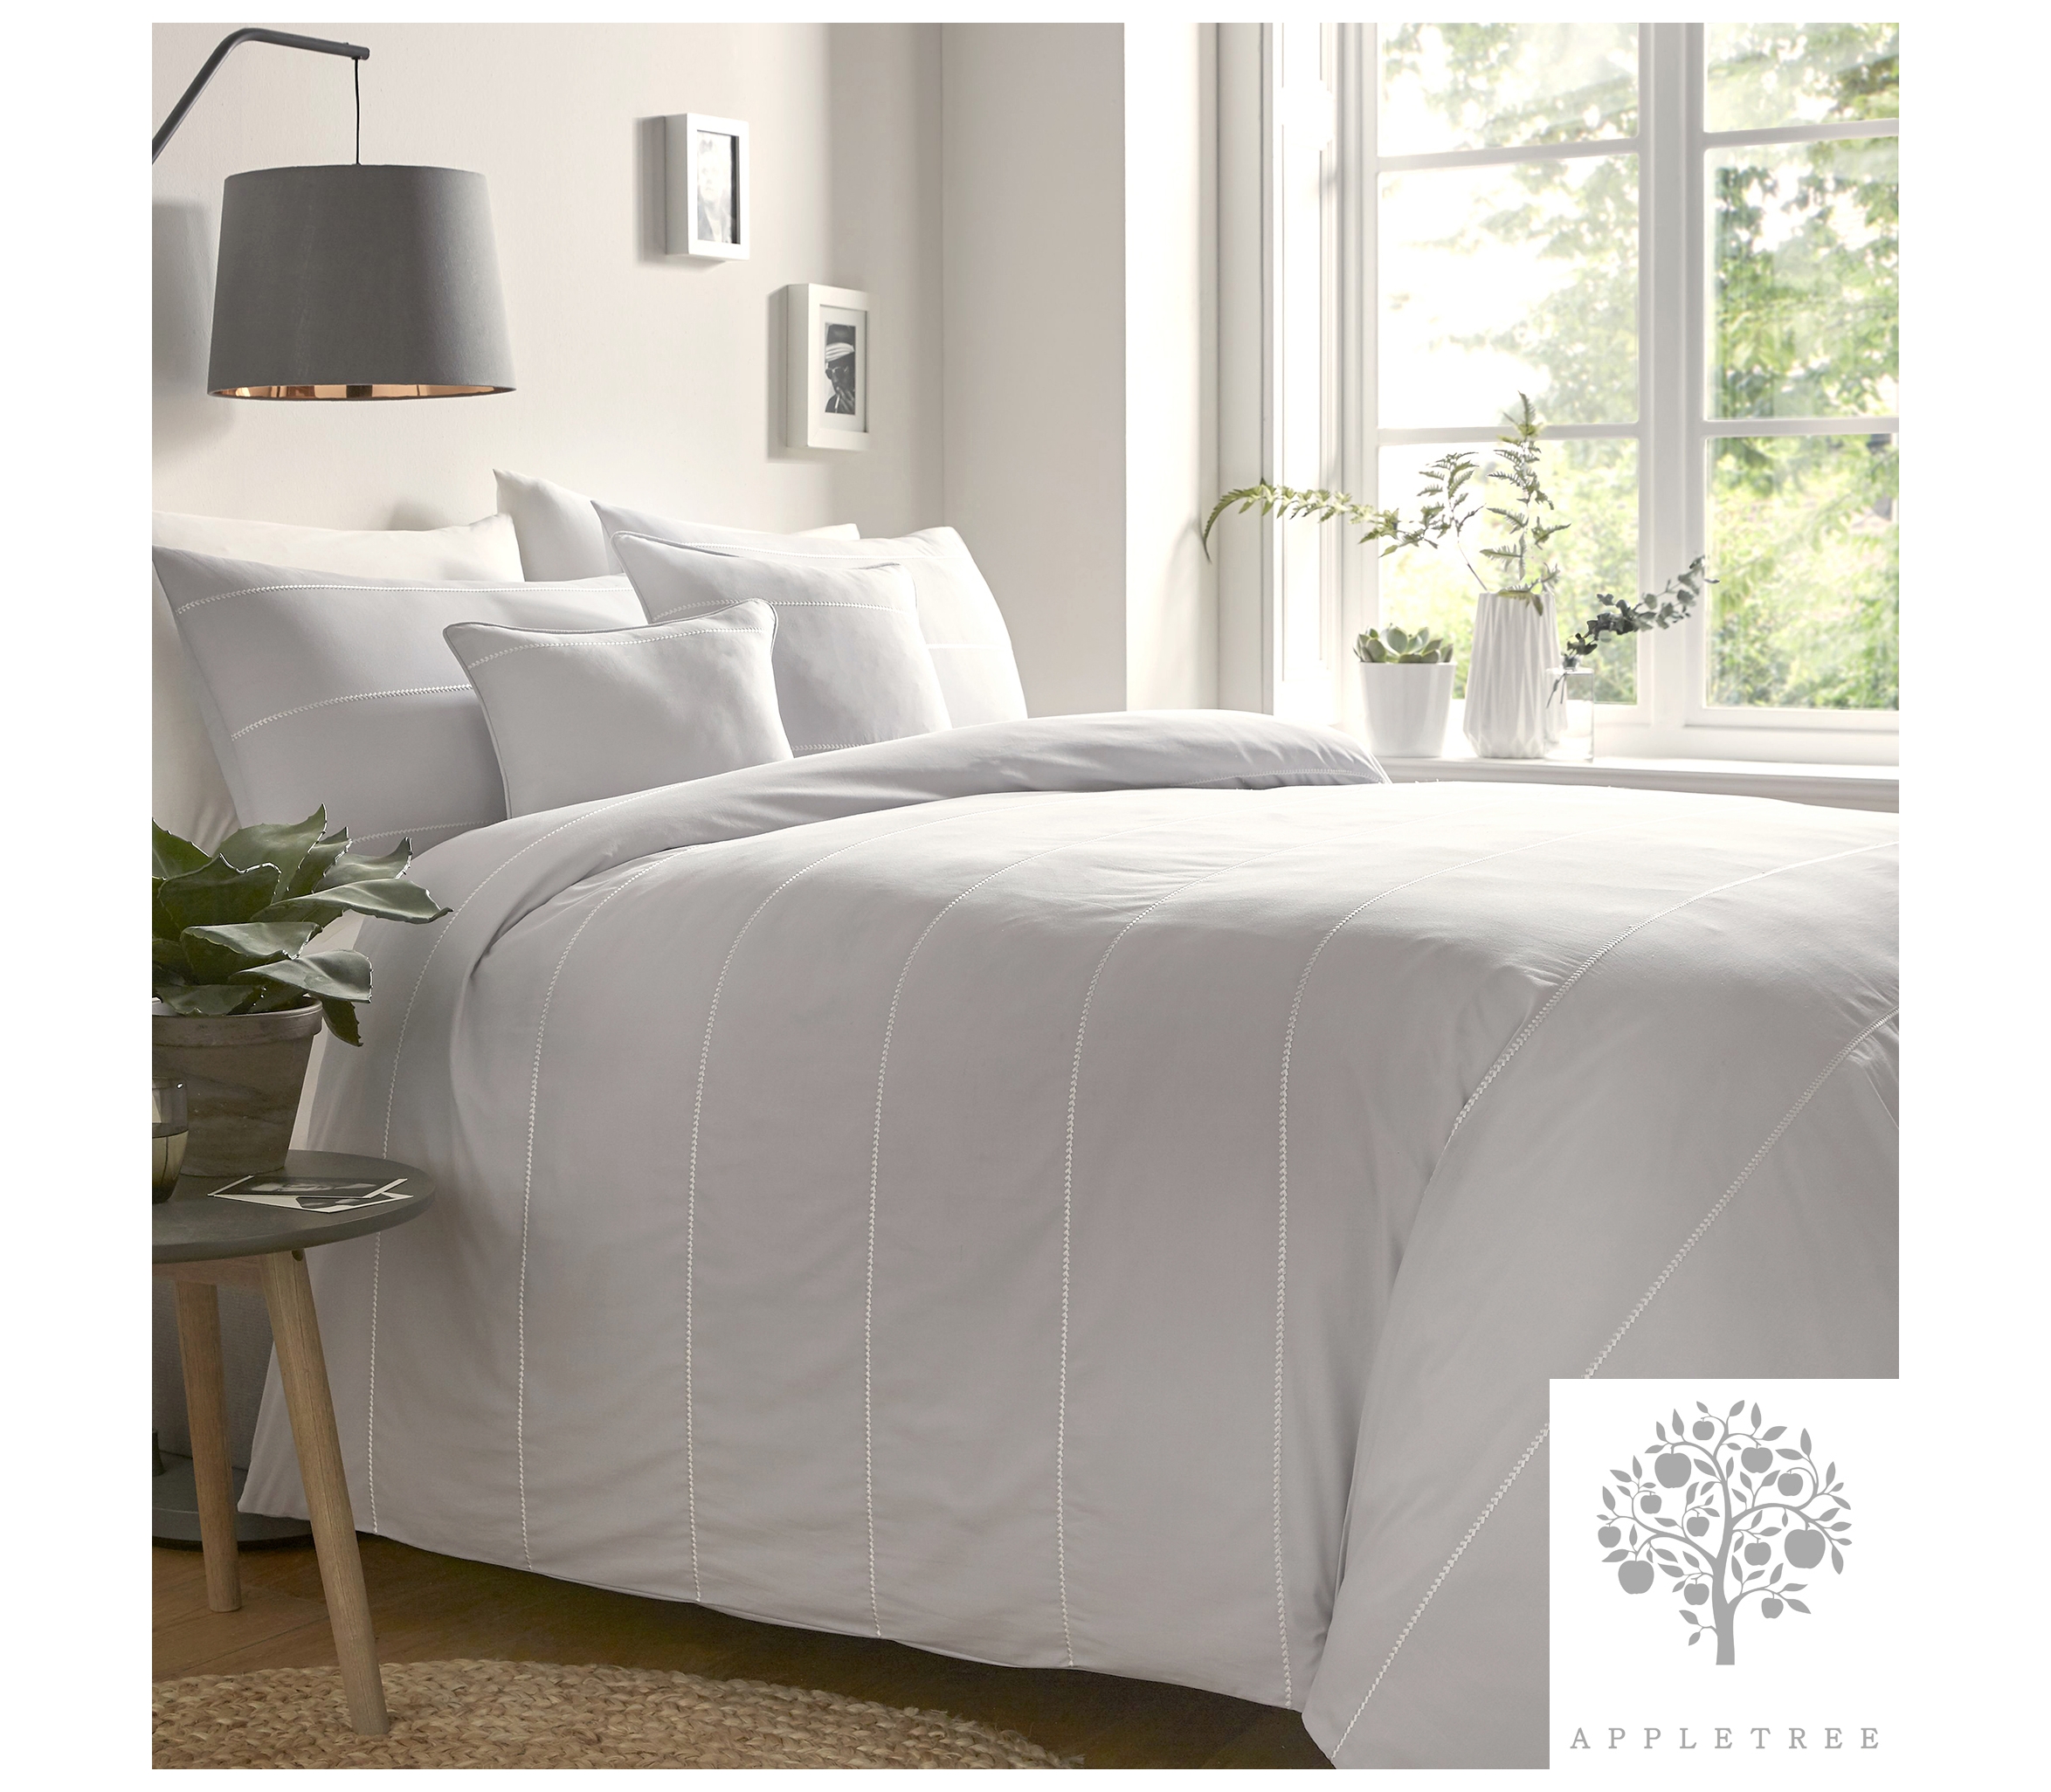 Appletree Signature Salcombe Silver Duvet Cover Set J Rosenthal And Son